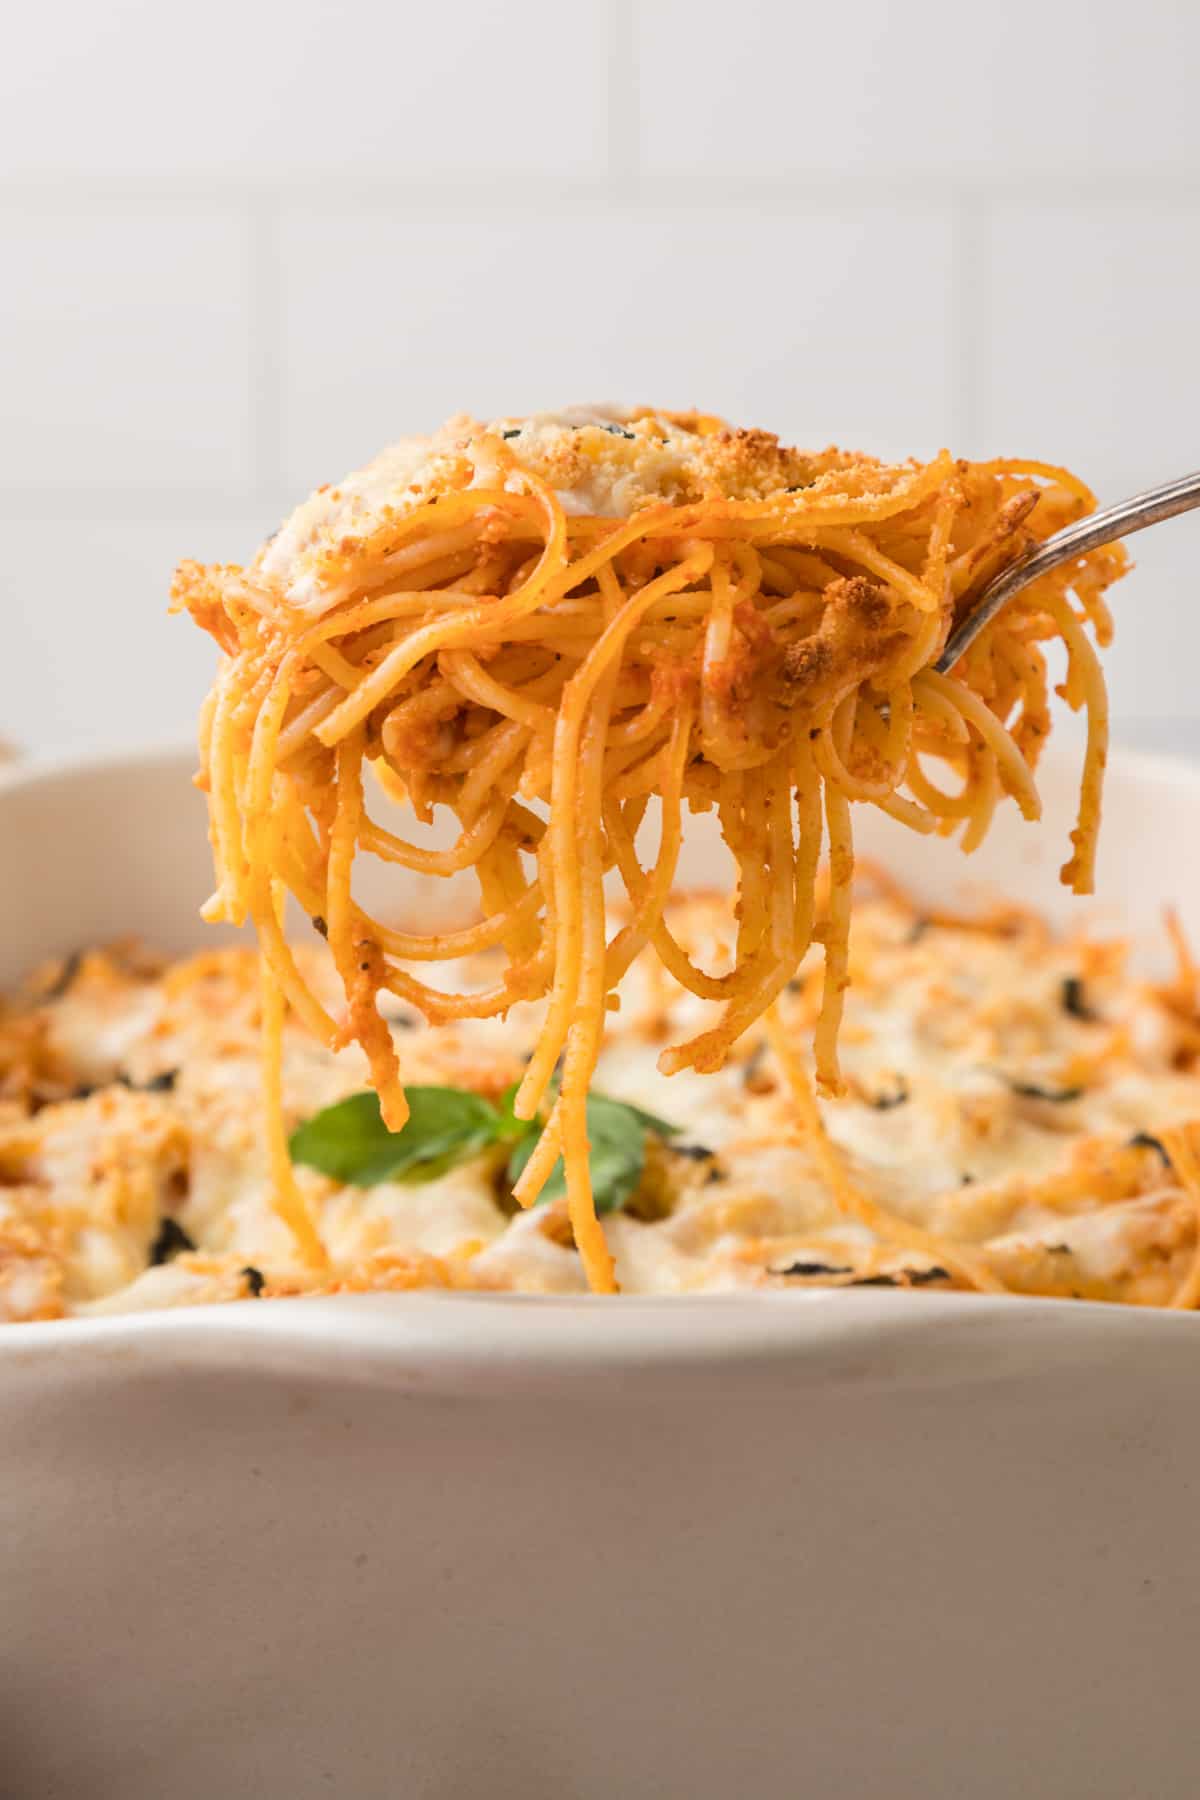 A spoonful of baked spaghetti pasta casserole  is being lifted out of a casserole dish.